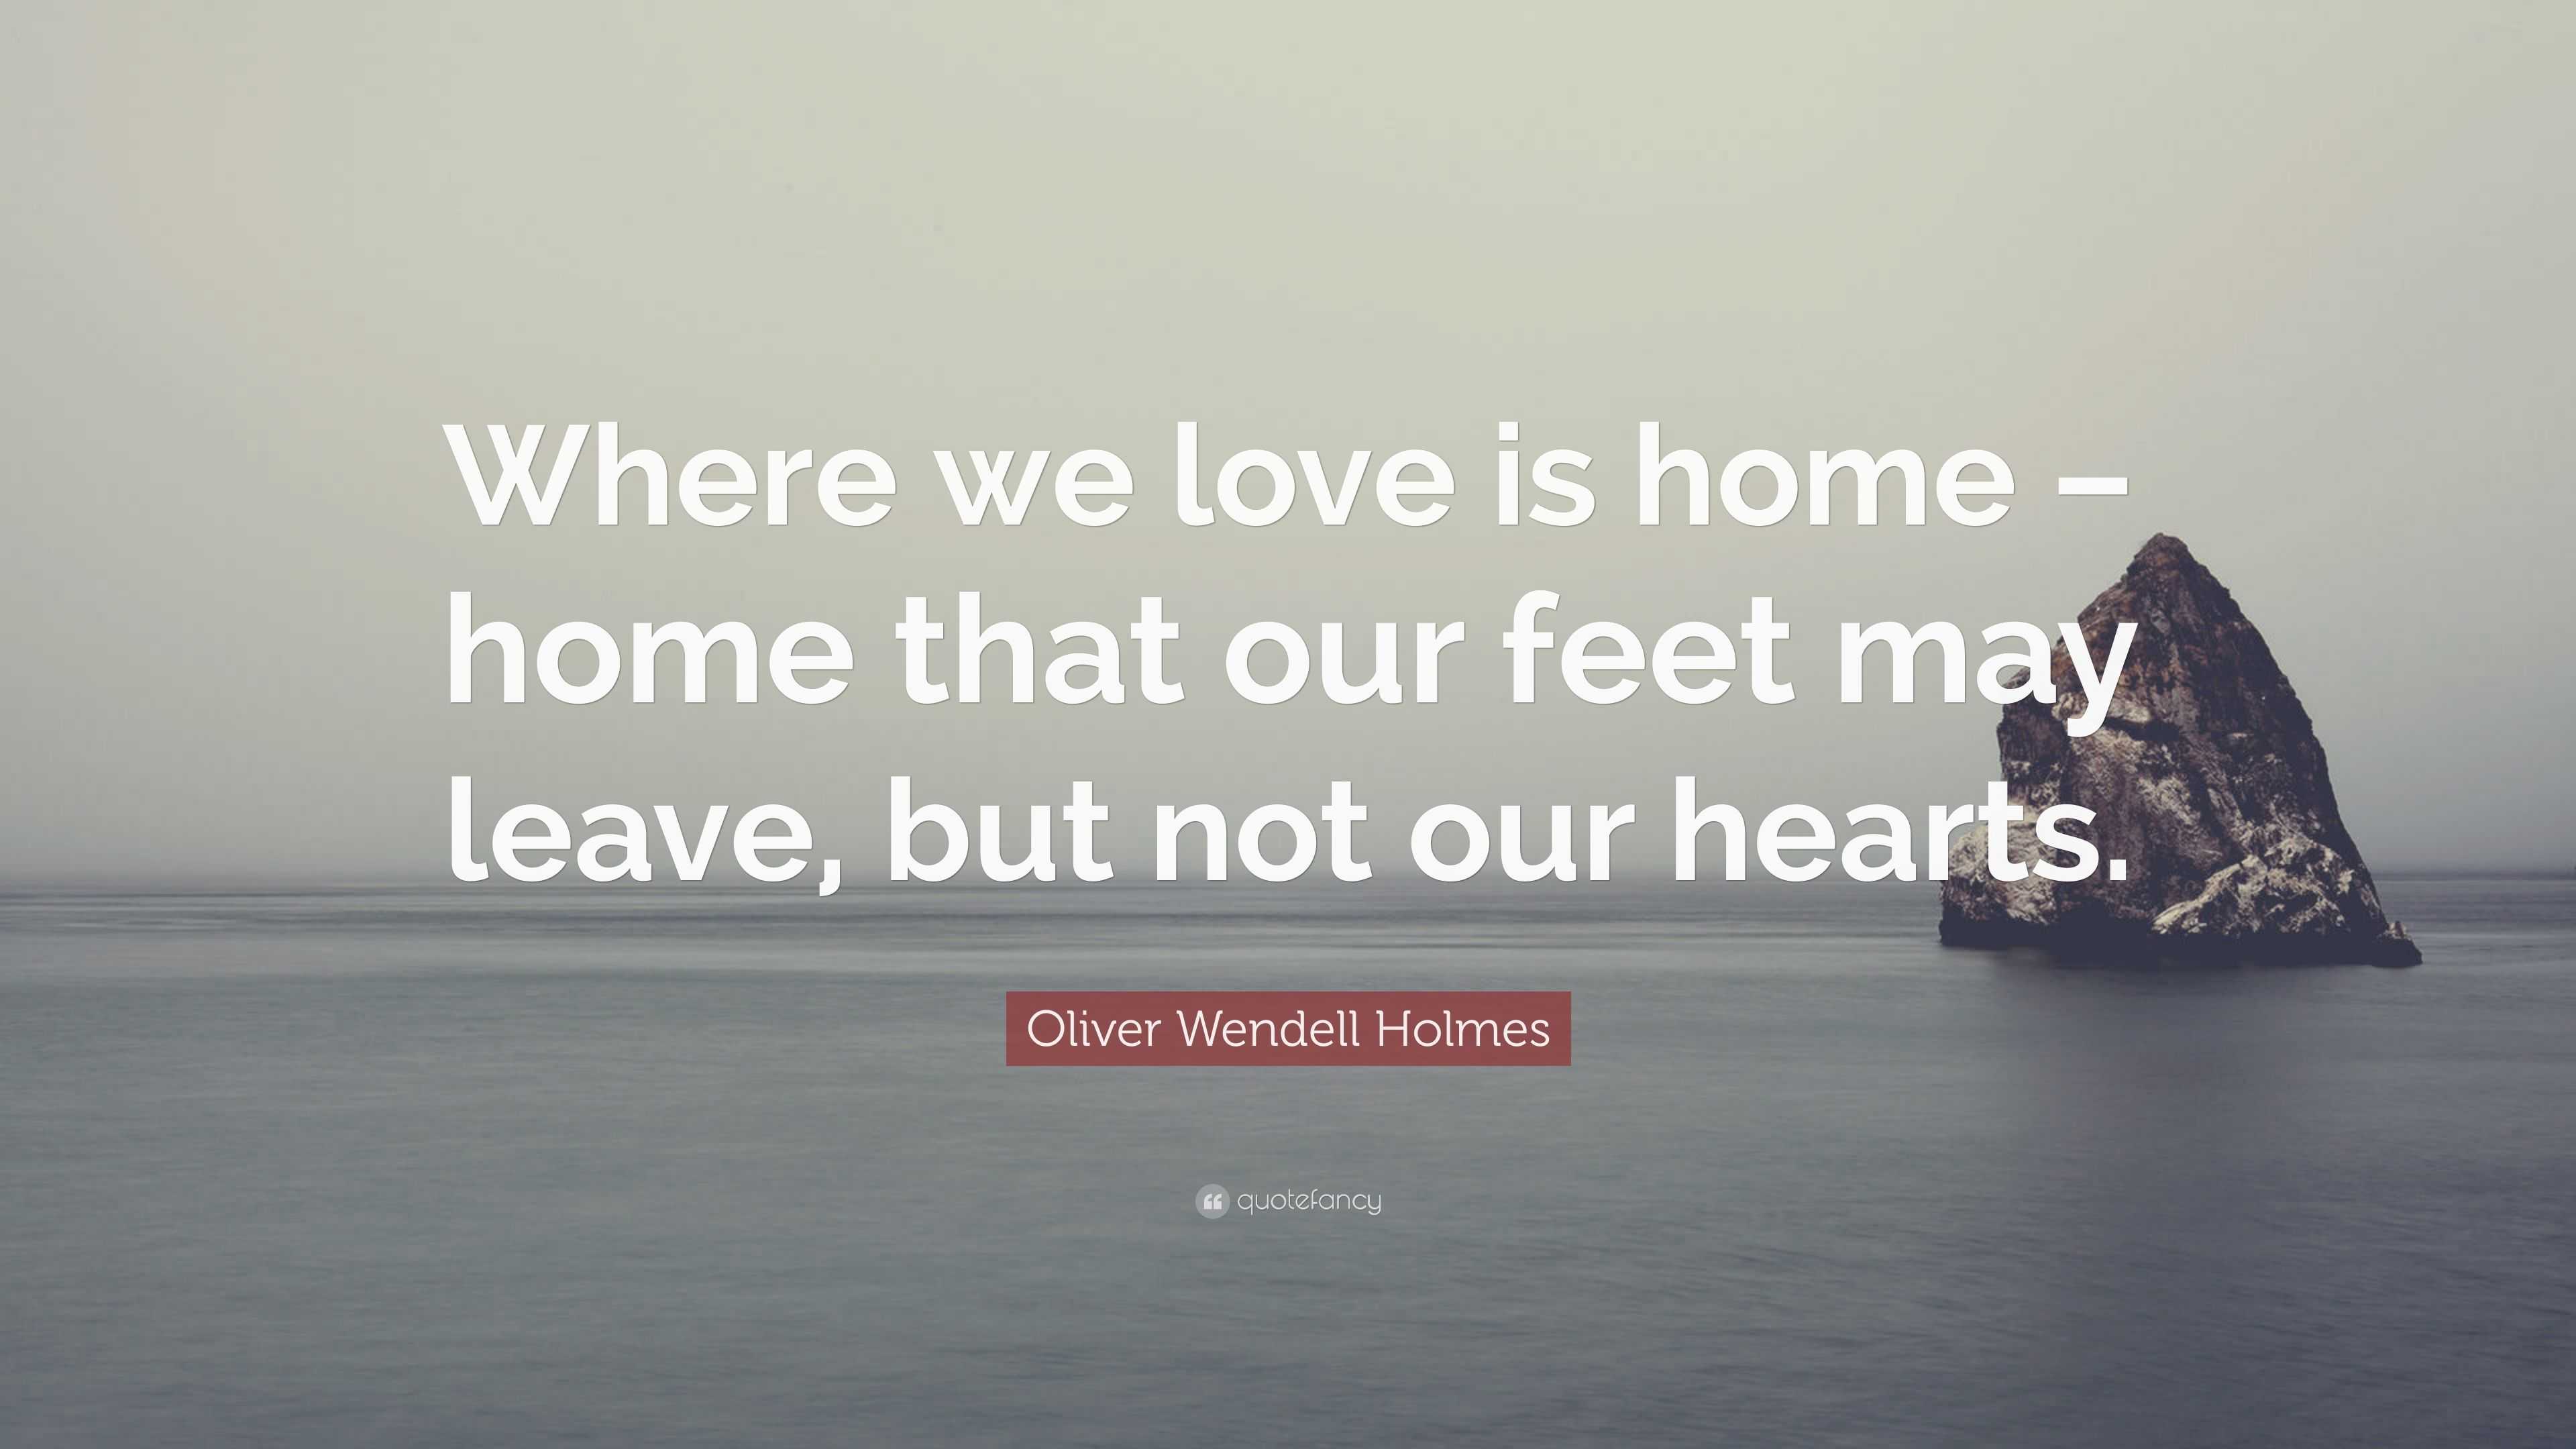 Oliver Wendell Holmes Quote: “Where we love is home – home that our ...